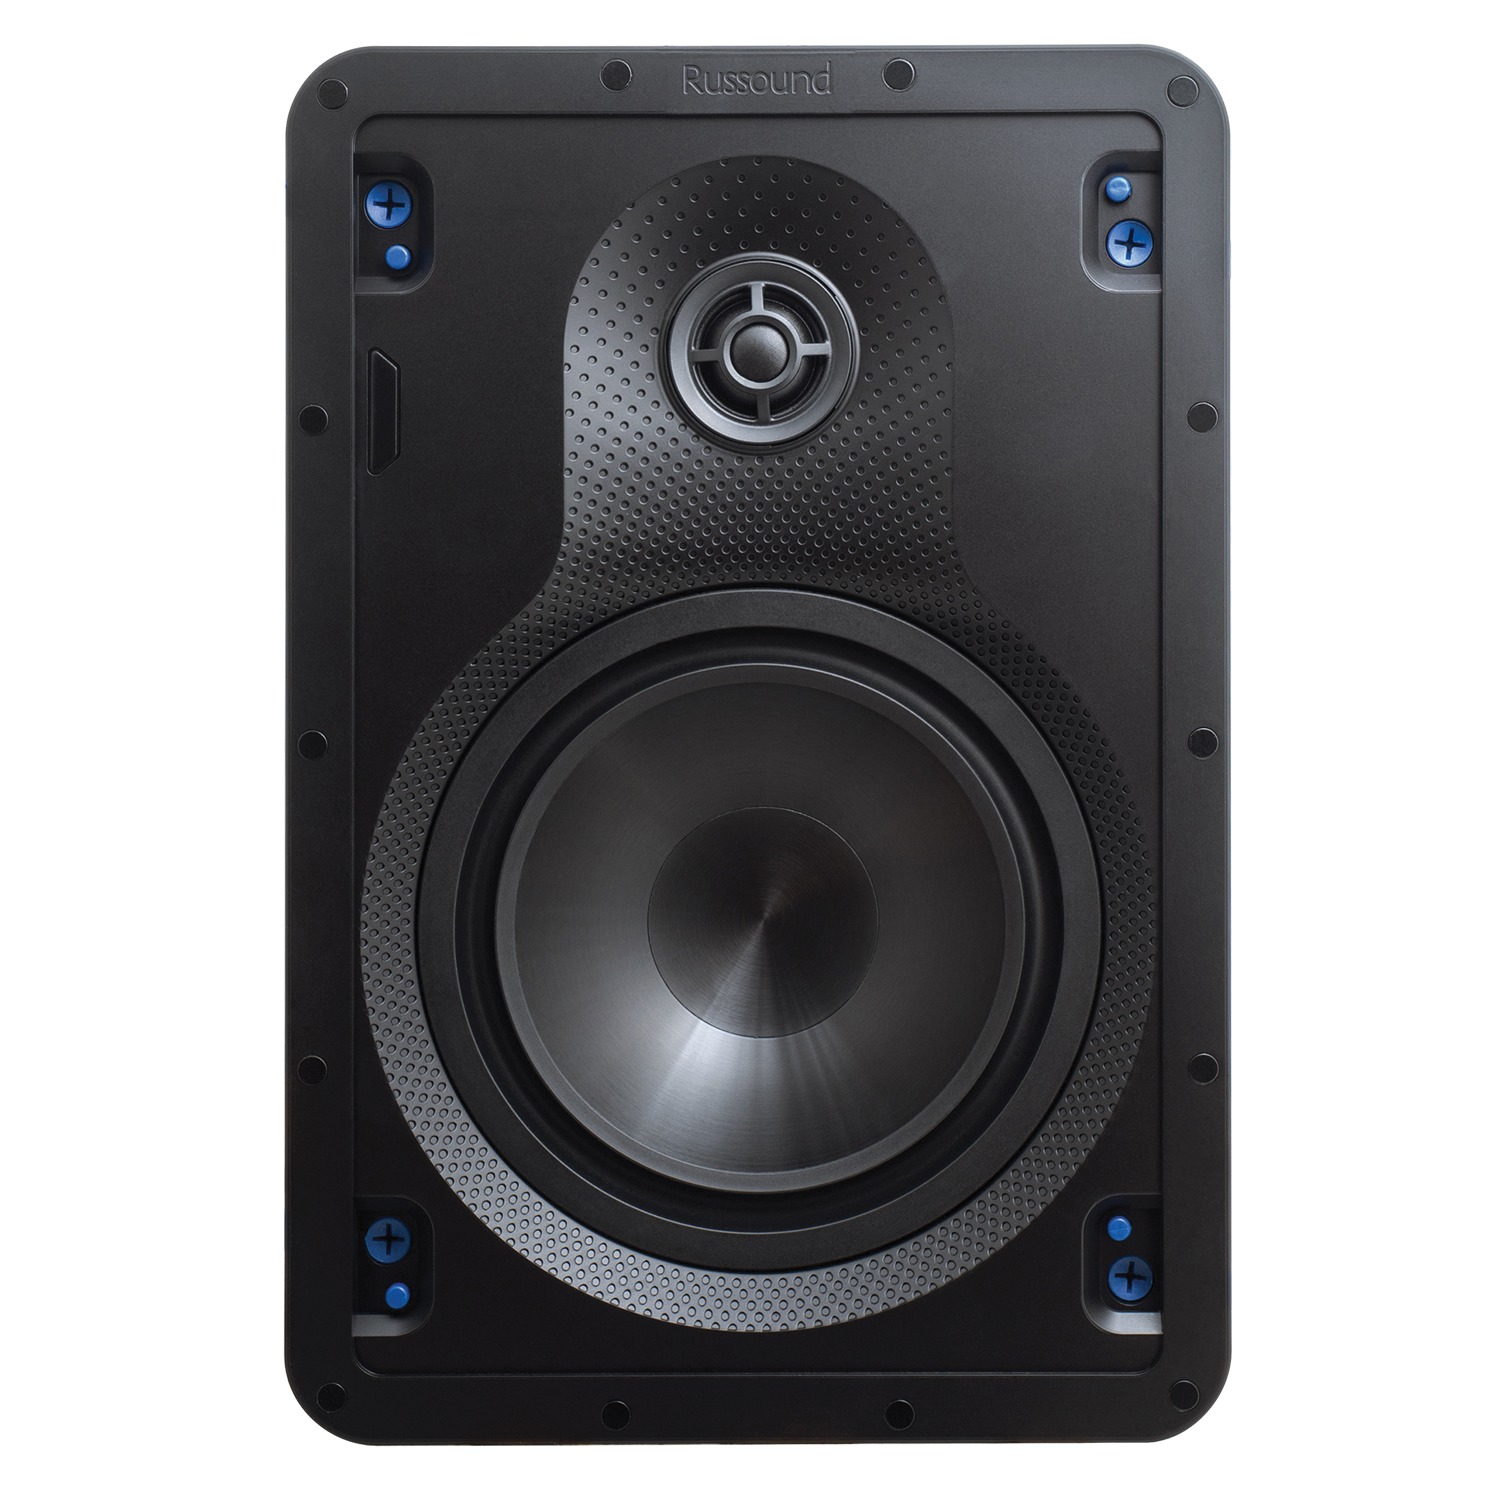 Russound IW-620 Architectural Series 6.5-Inch In-Wall Enhanced Performance 2-Way Loudspeakers - image 3 of 6